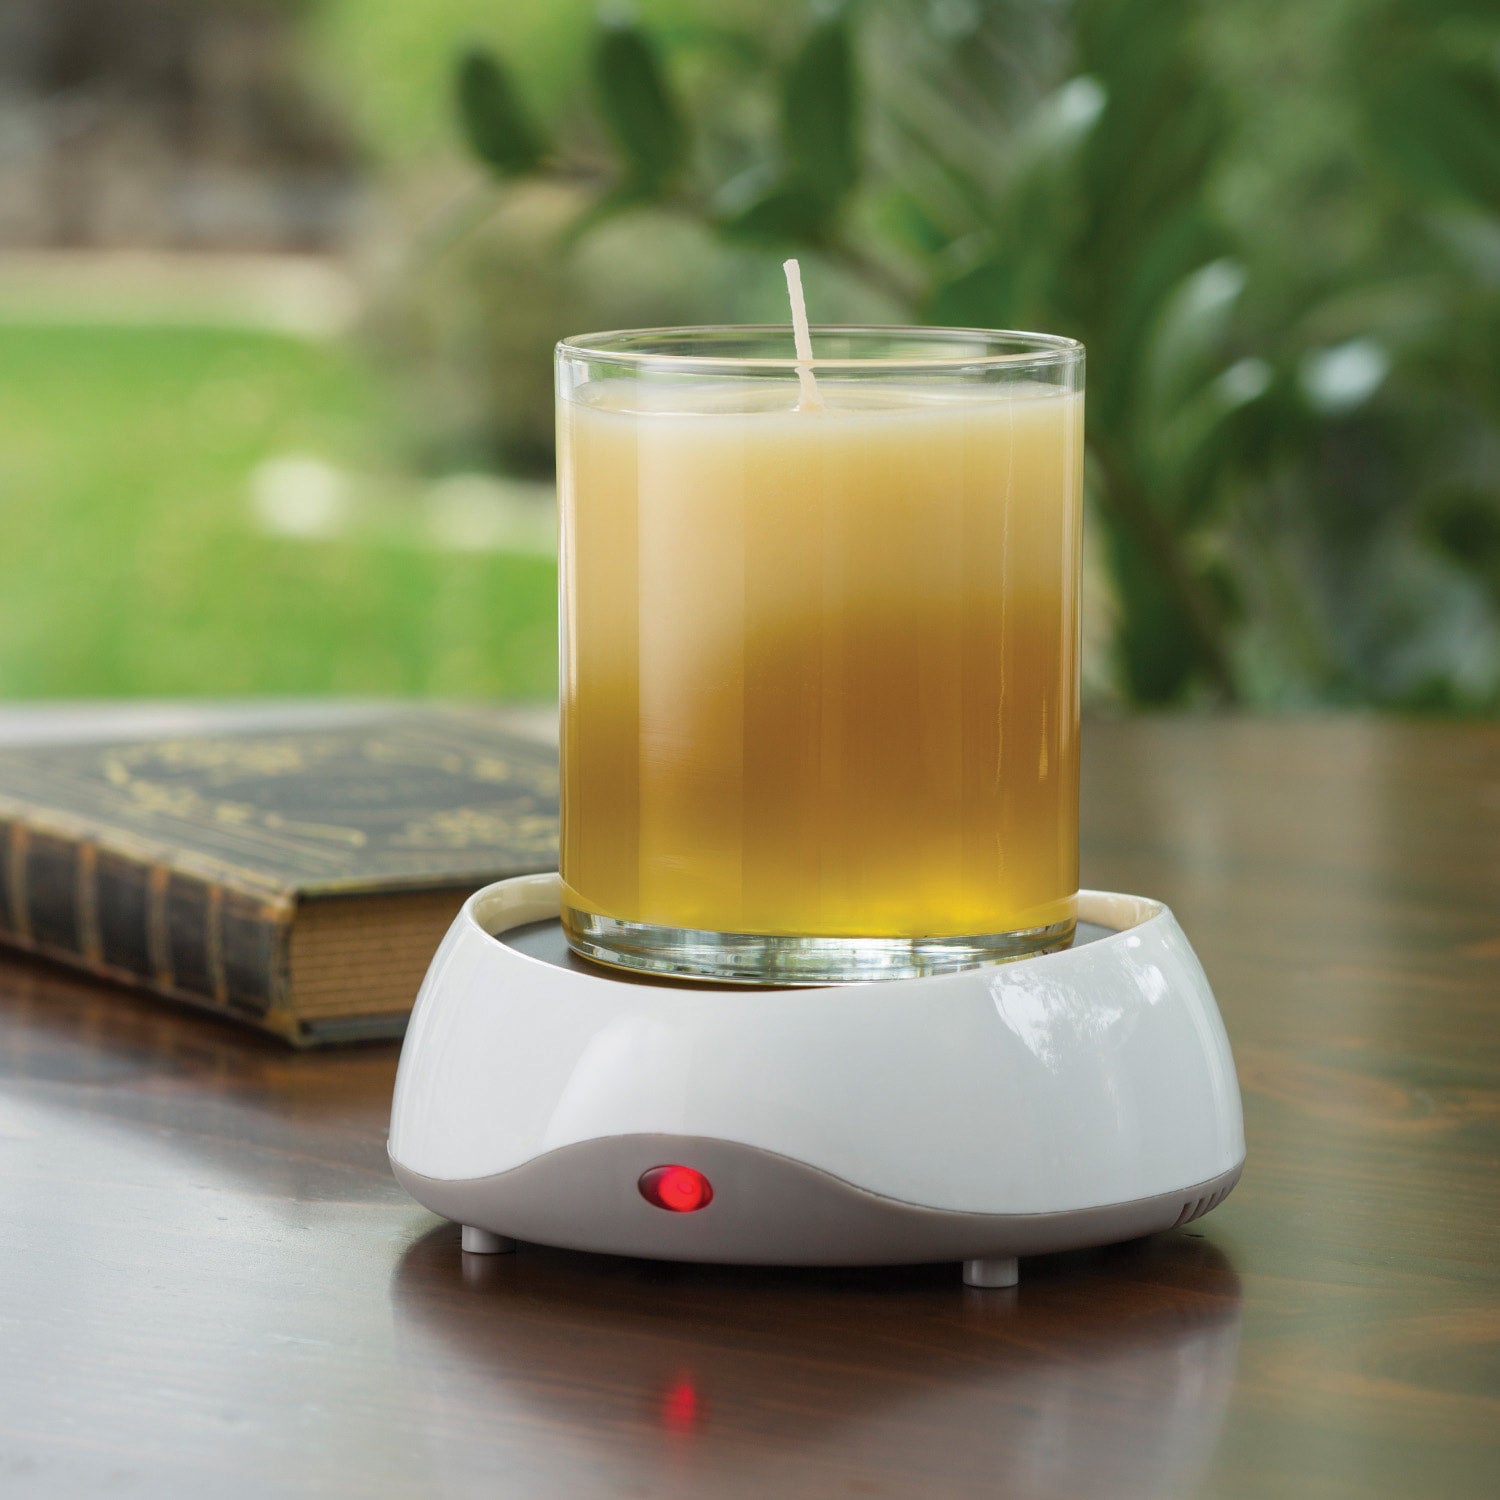 Pineapple Illuminating Wax Melter - Book Scents Candles